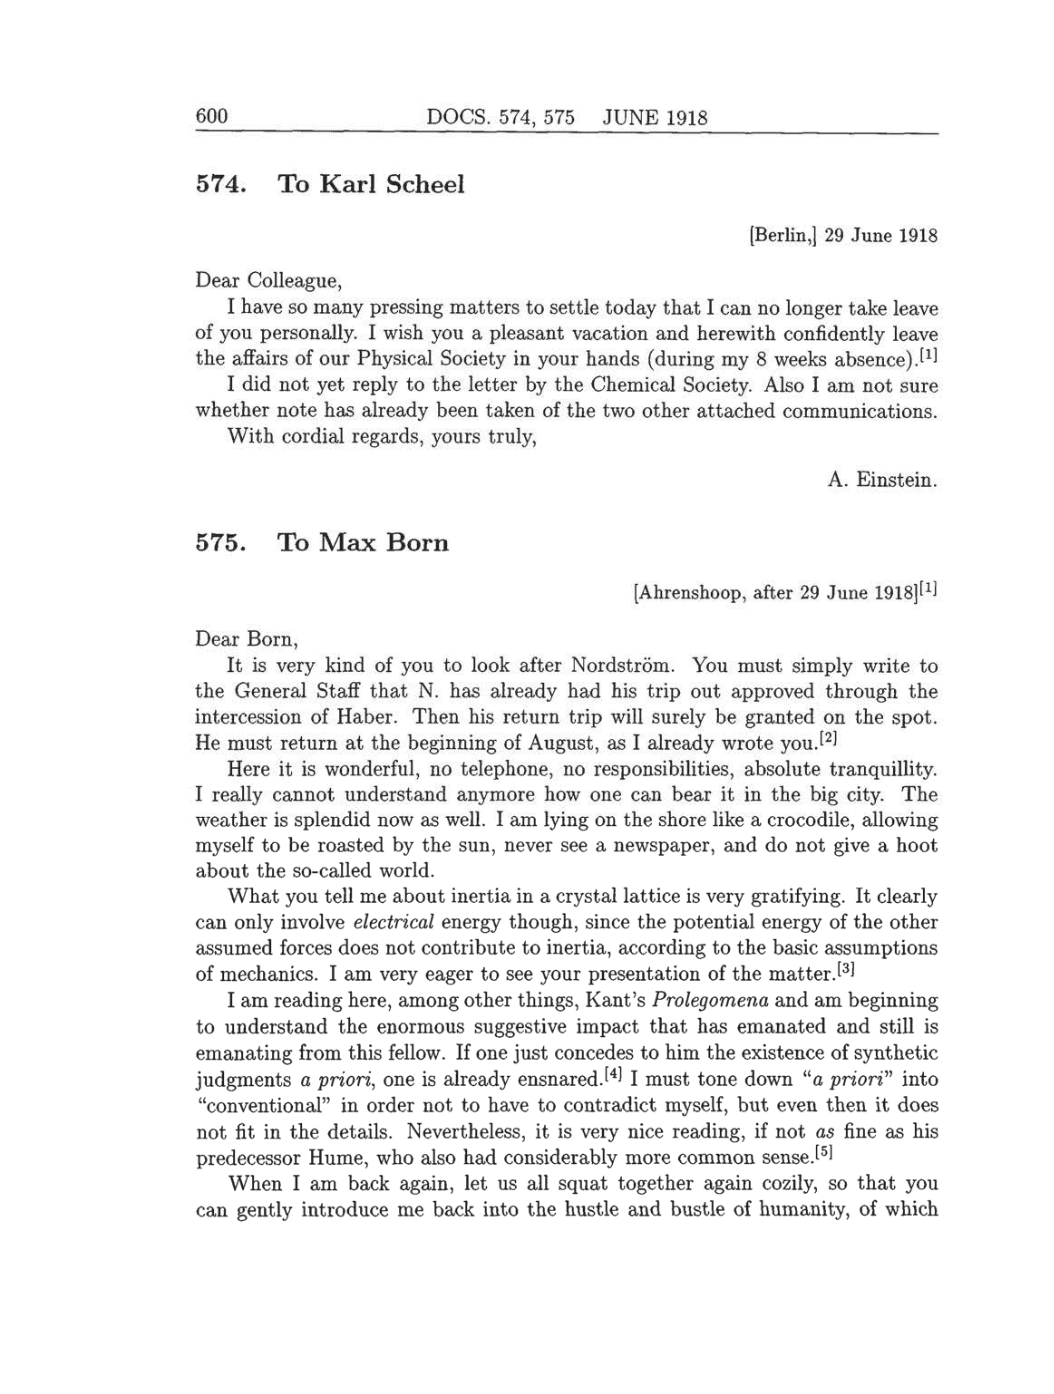 Volume 8: The Berlin Years: Correspondence, 1914-1918 (English translation supplement) page 600